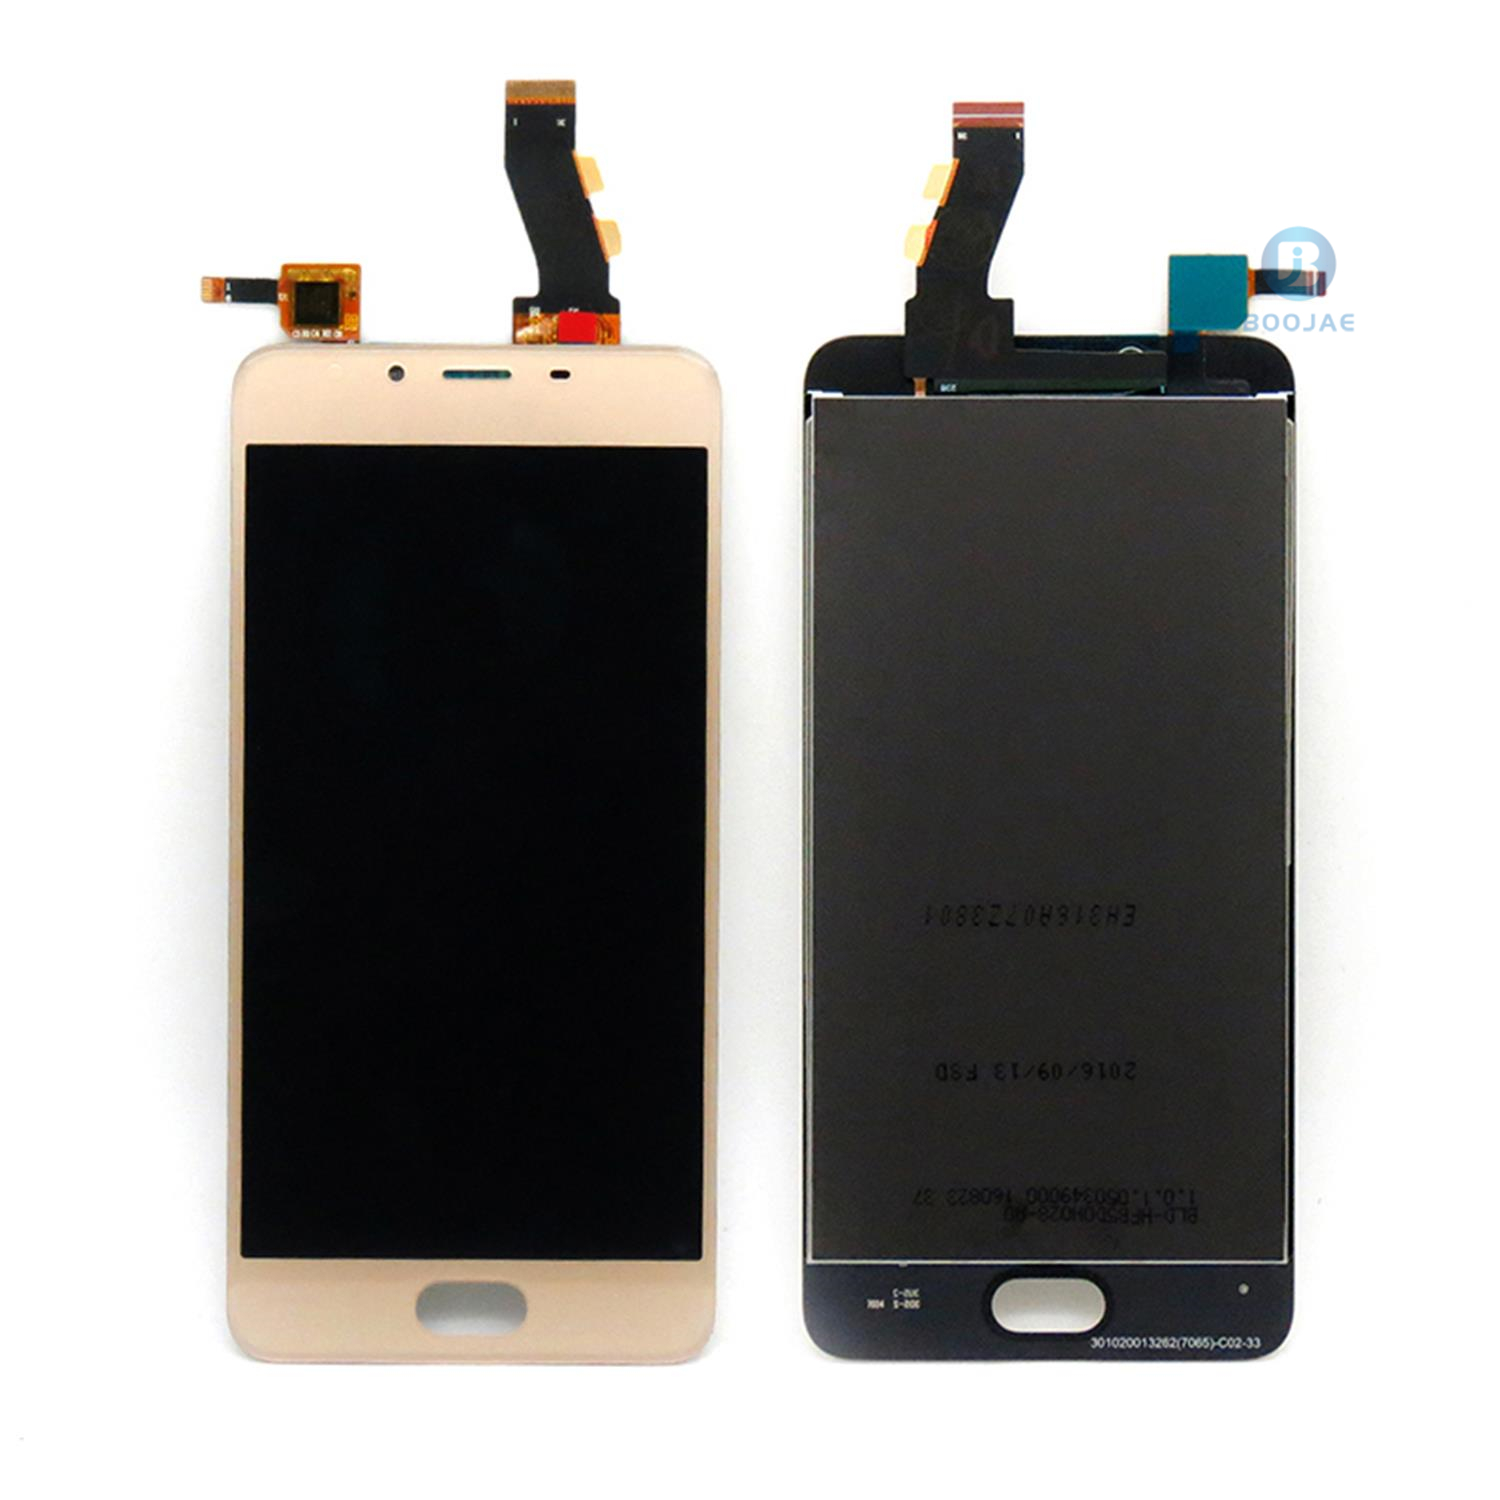 For Meizu Meilan U10 LCD Screen Display and Touch Panel Digitizer Assembly Replacement